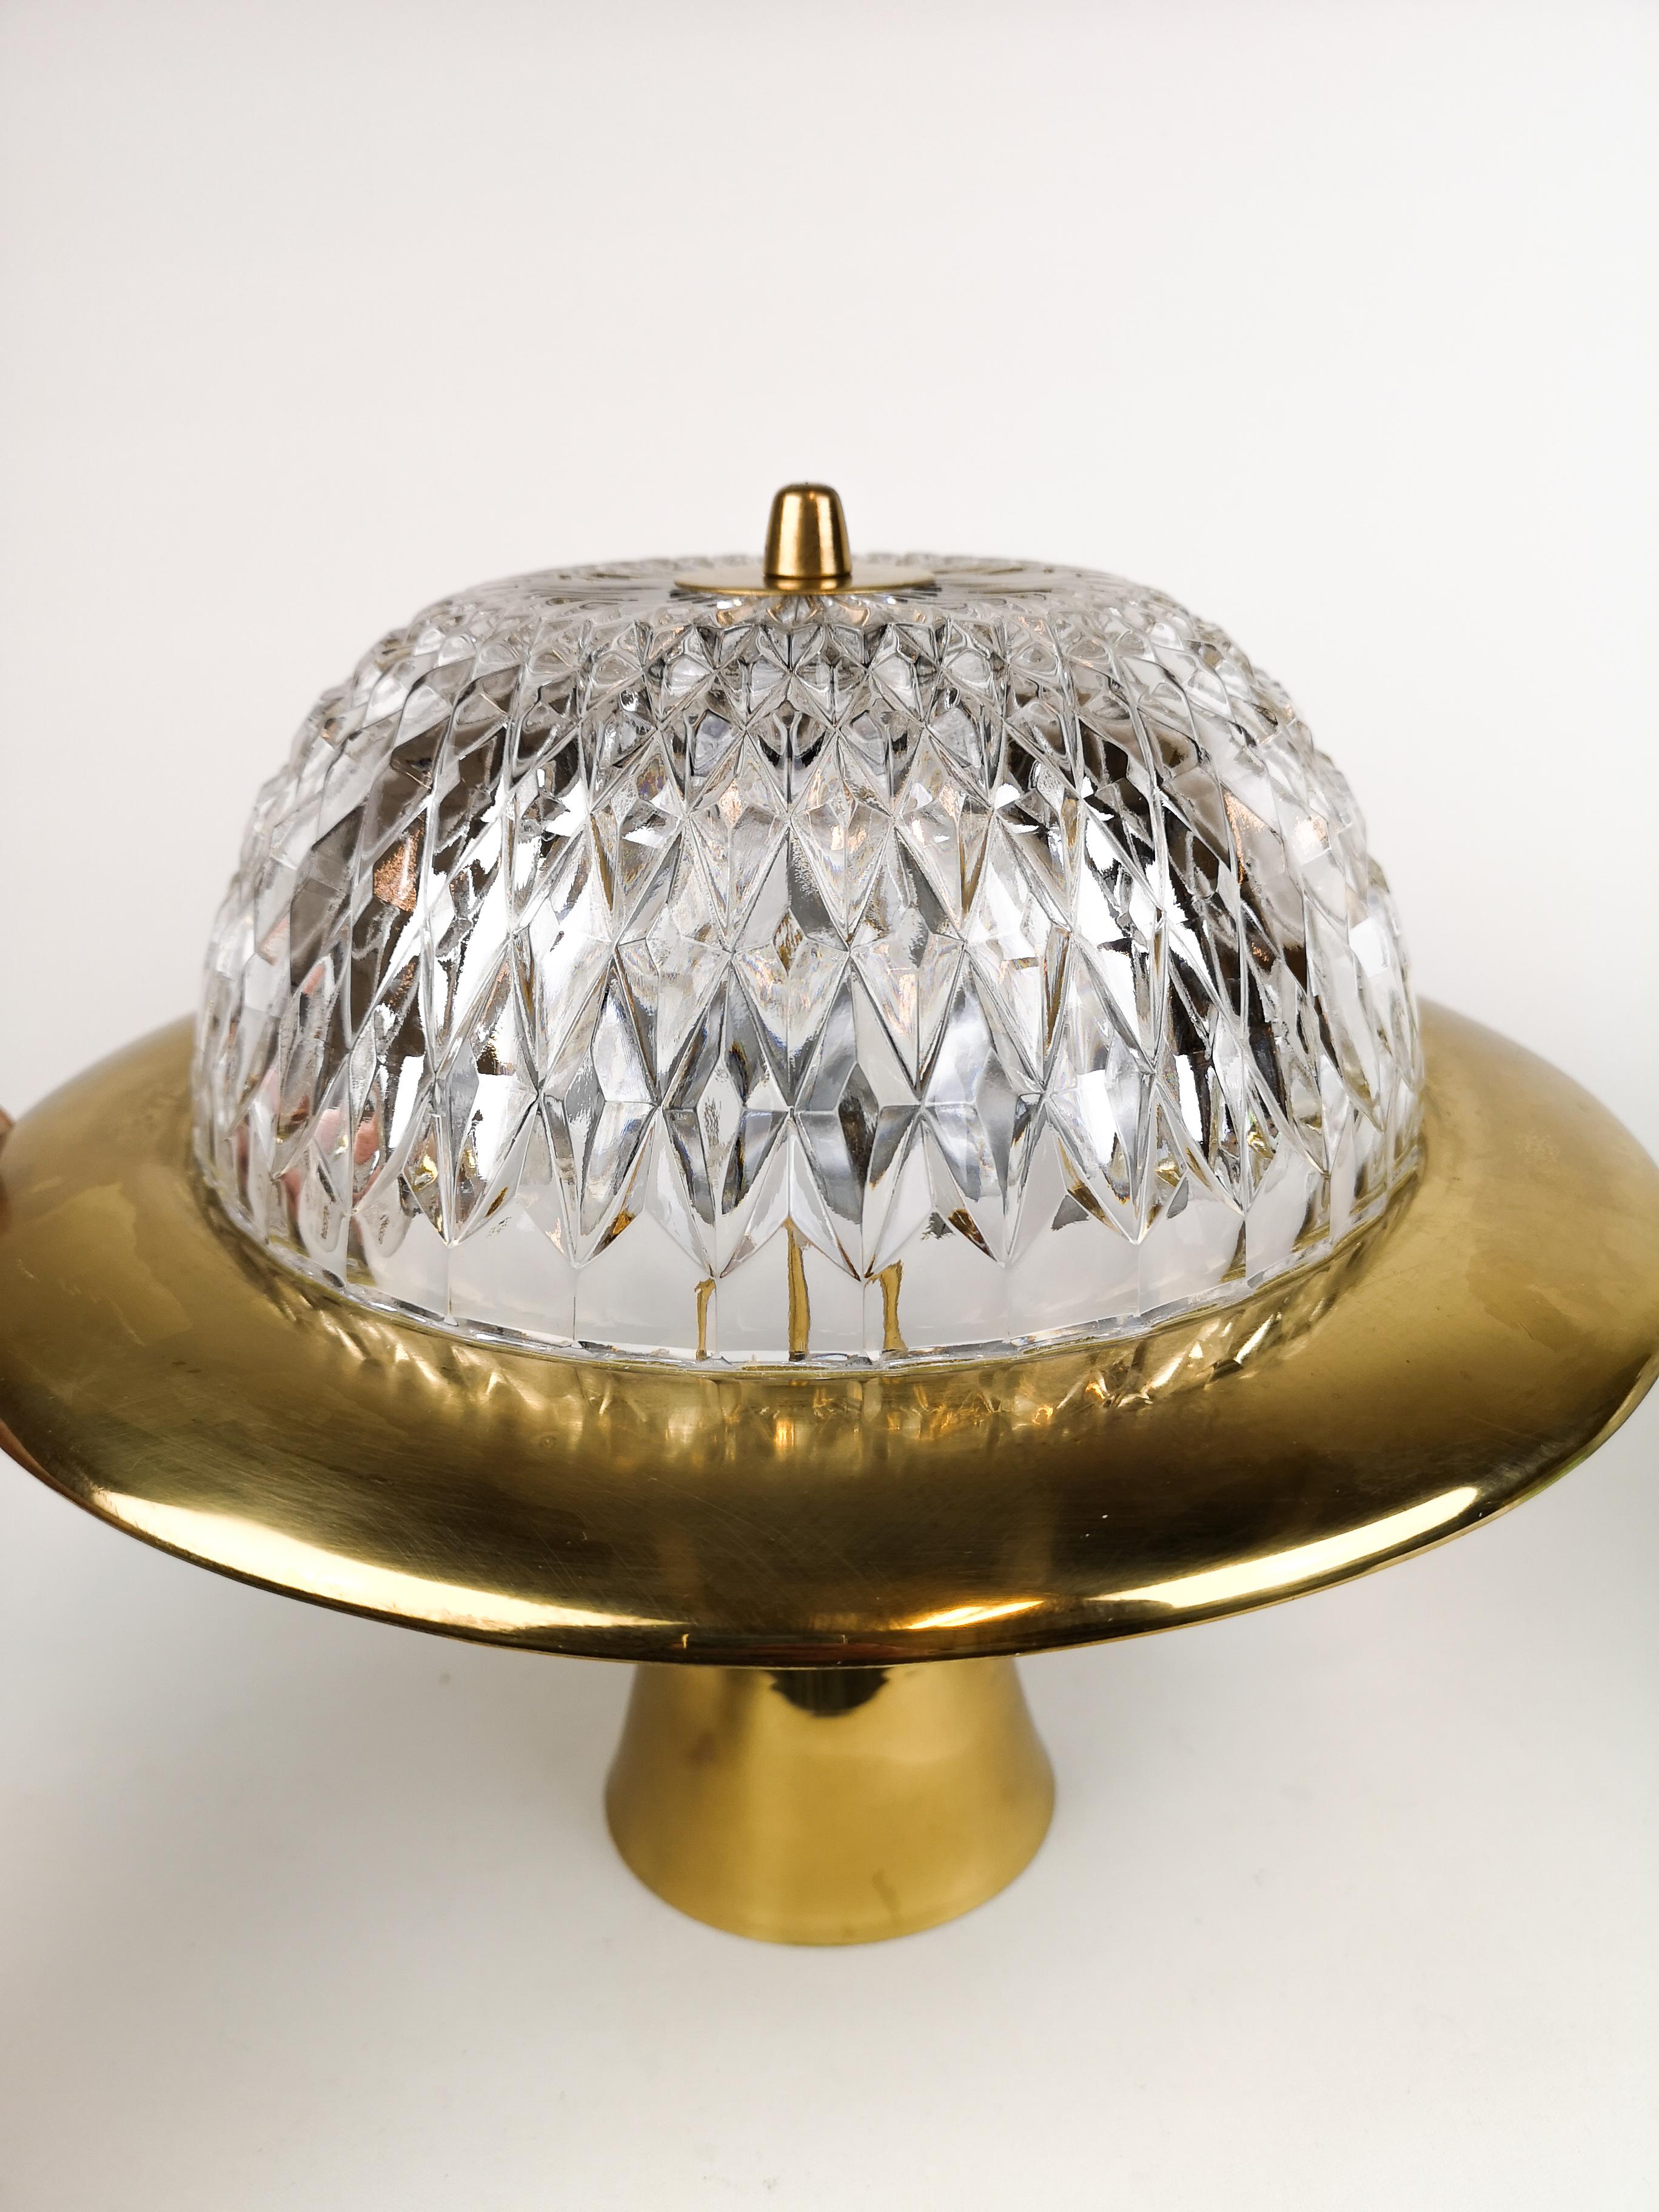 1960s, Brass and Crystal Celling Lamp by Tyringe for Orrefors, Sweden For Sale 6